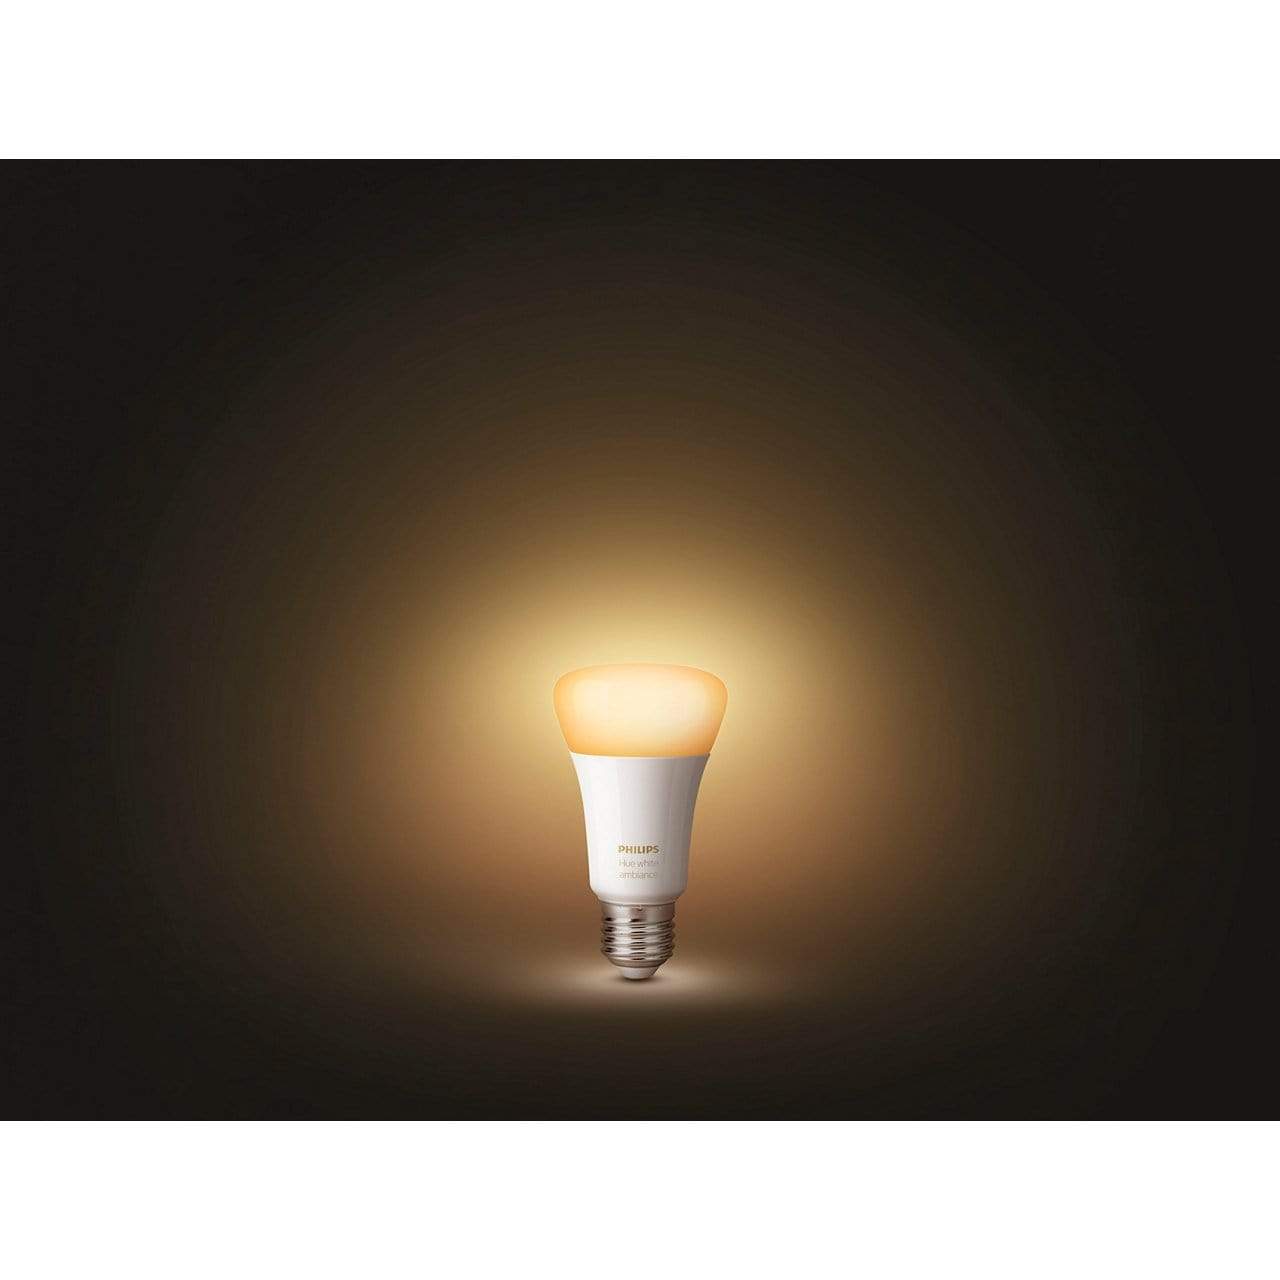 Philips Hue White Ambiance Starter Kit LED Bulb, Dimmable with Smart Devices - DELIGHT OptoElectronics Pte. Ltd